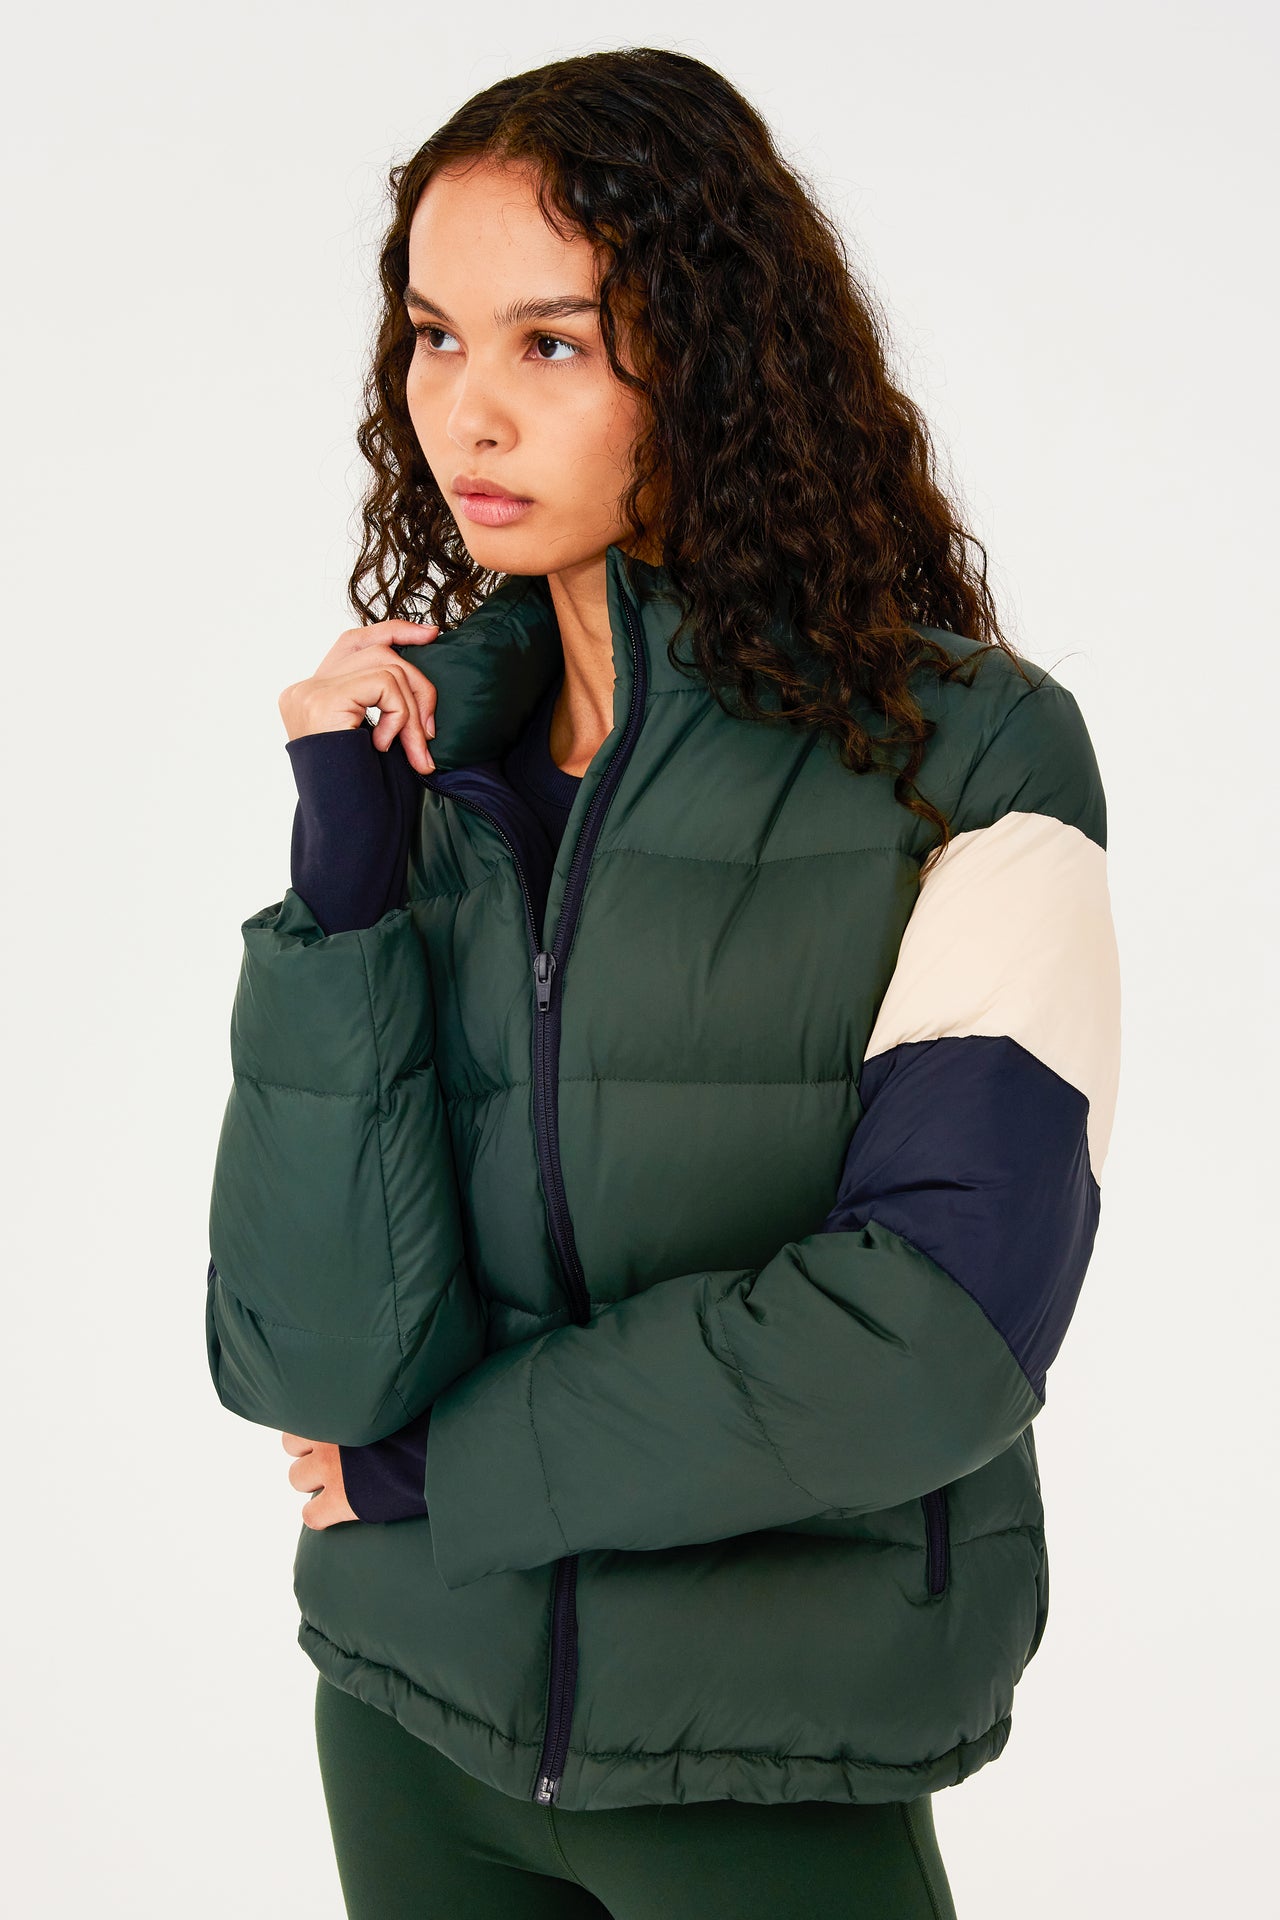 Side view of girl wearing dark green puffer jacket with blue and white stripes on arms and sleeve cuffs with thumb holes